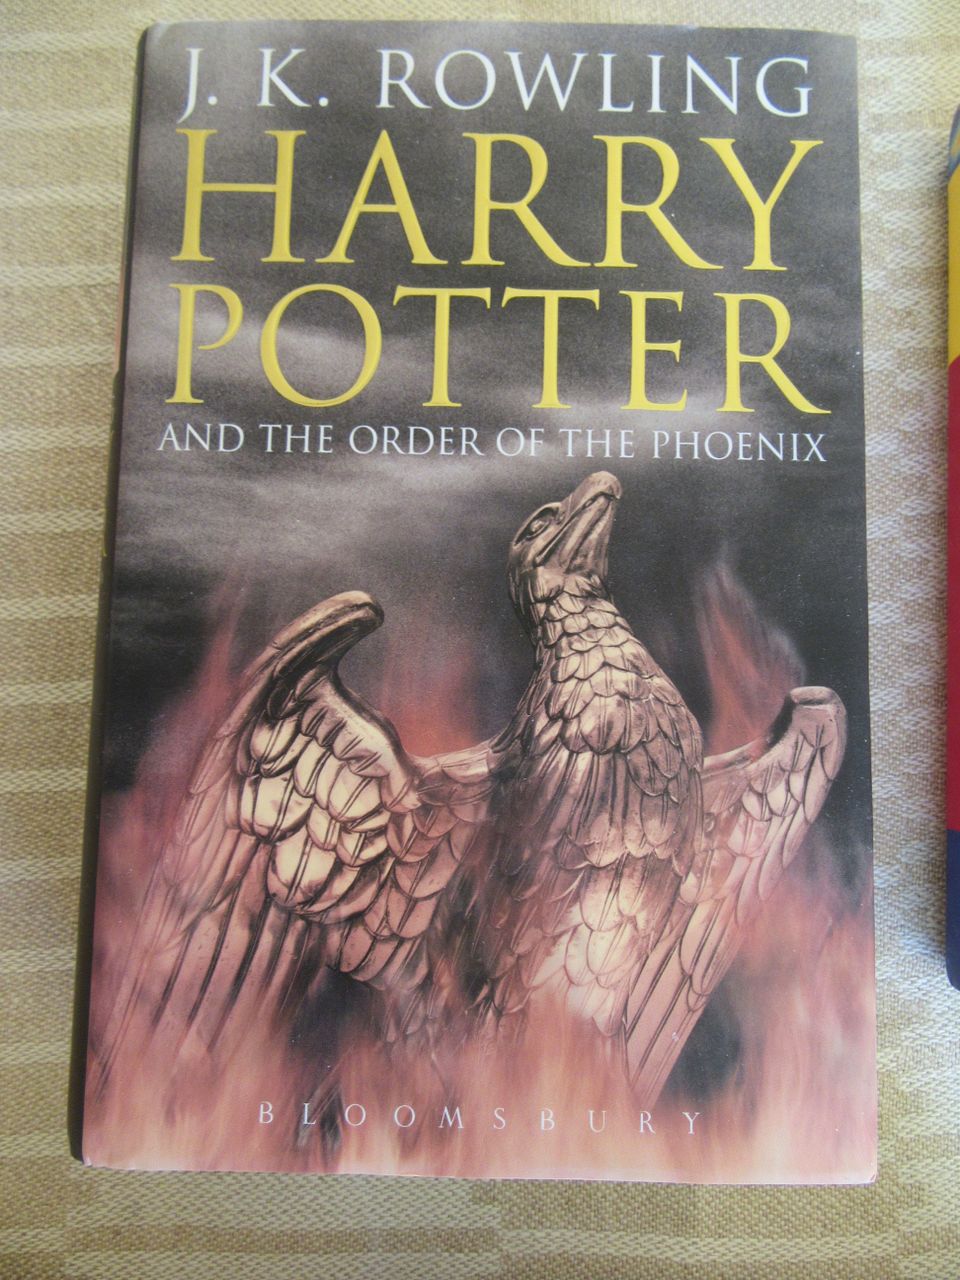 J.K.Rowling: HARRY POTTER and the 0rder of the Phoenix